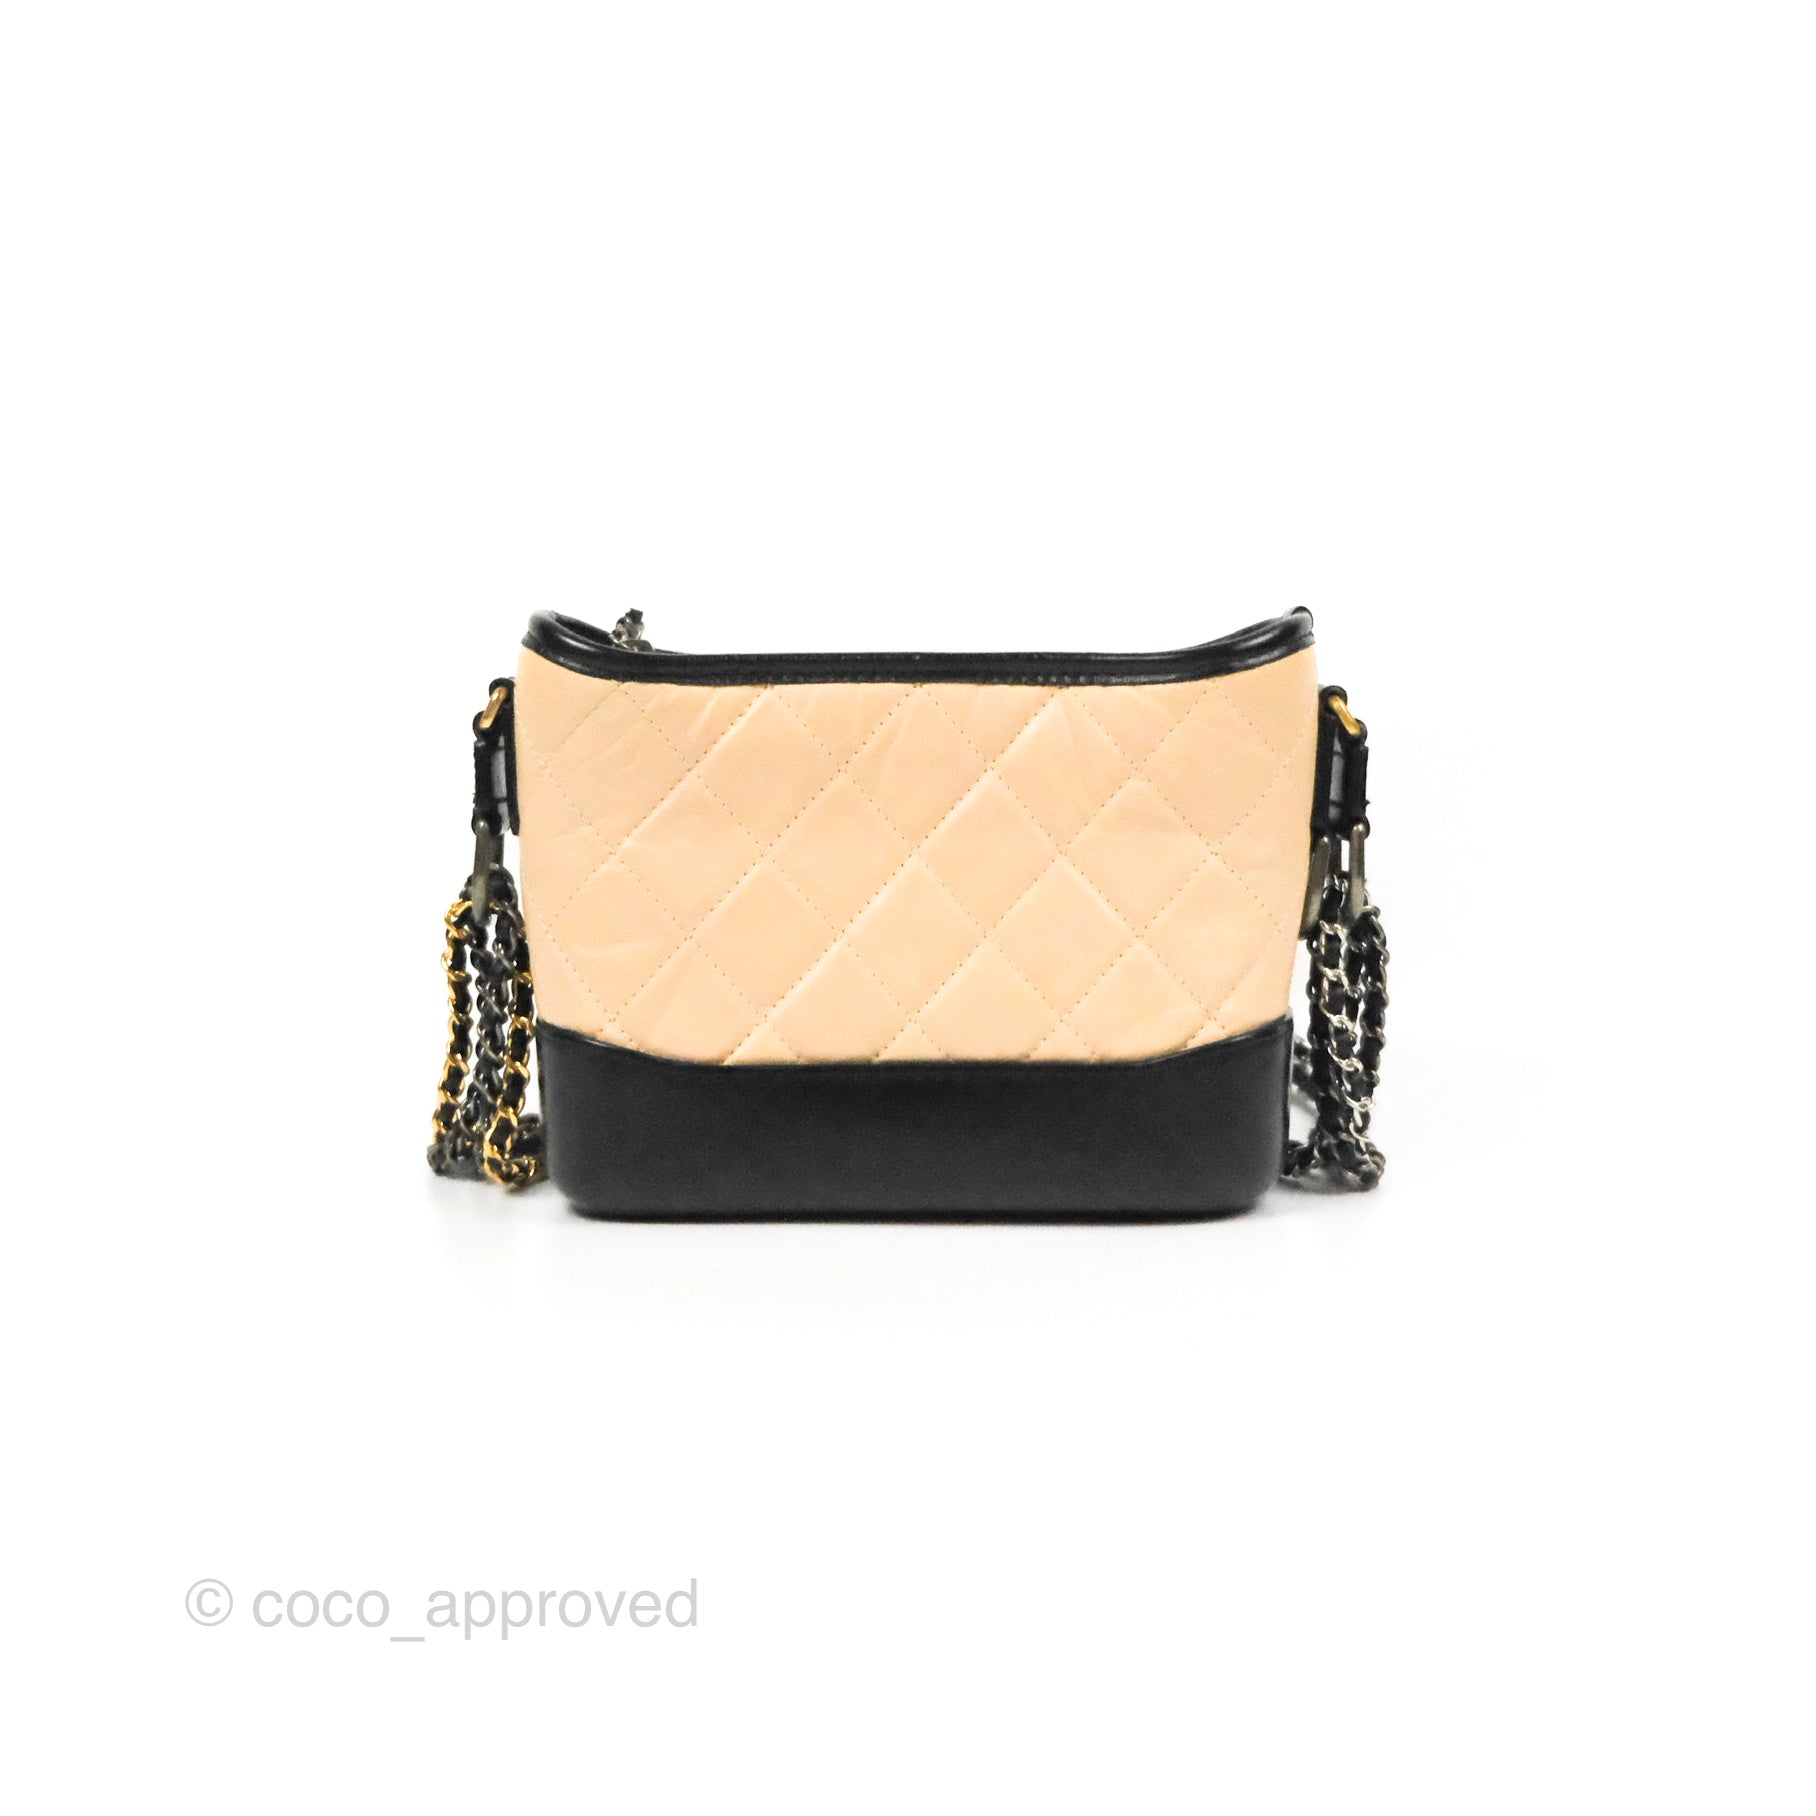 Chanel Beige/Black Quilted Aged Leather Medium Gabrielle Bag